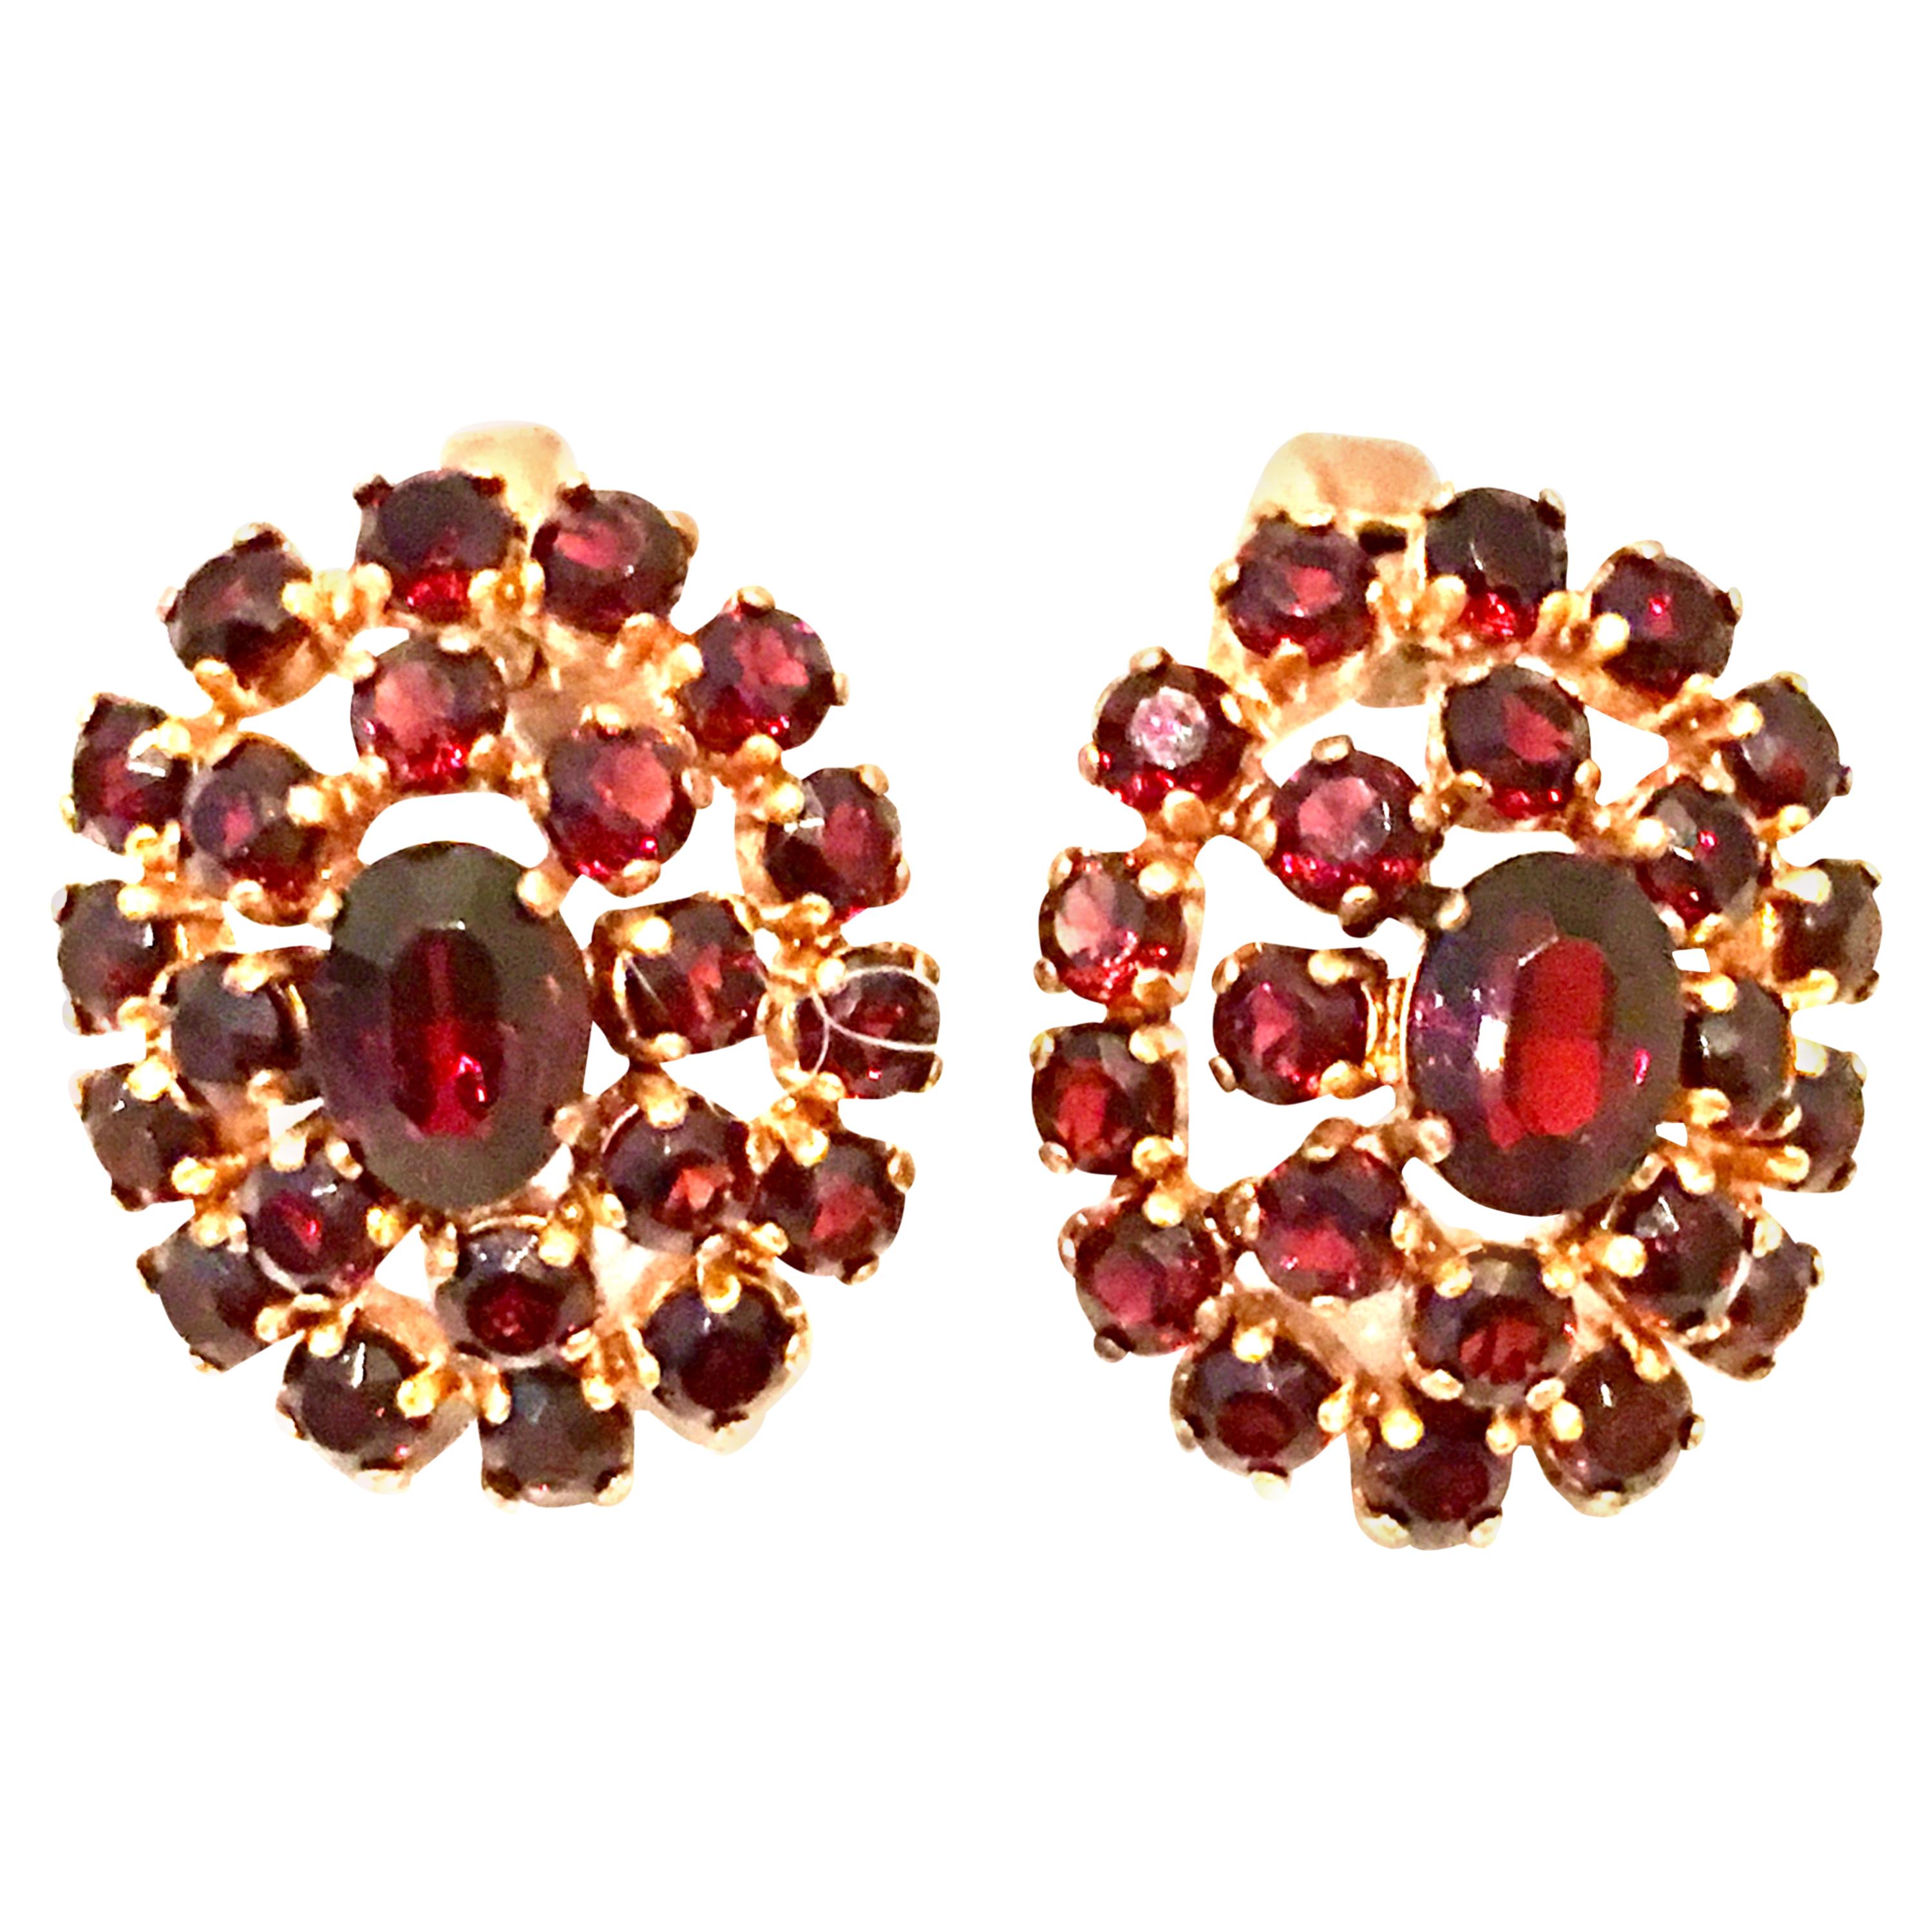 Mid-20th Century 12K Gold Plate & Authentic Rose Cut Garnet Pair Of Earrings For Sale